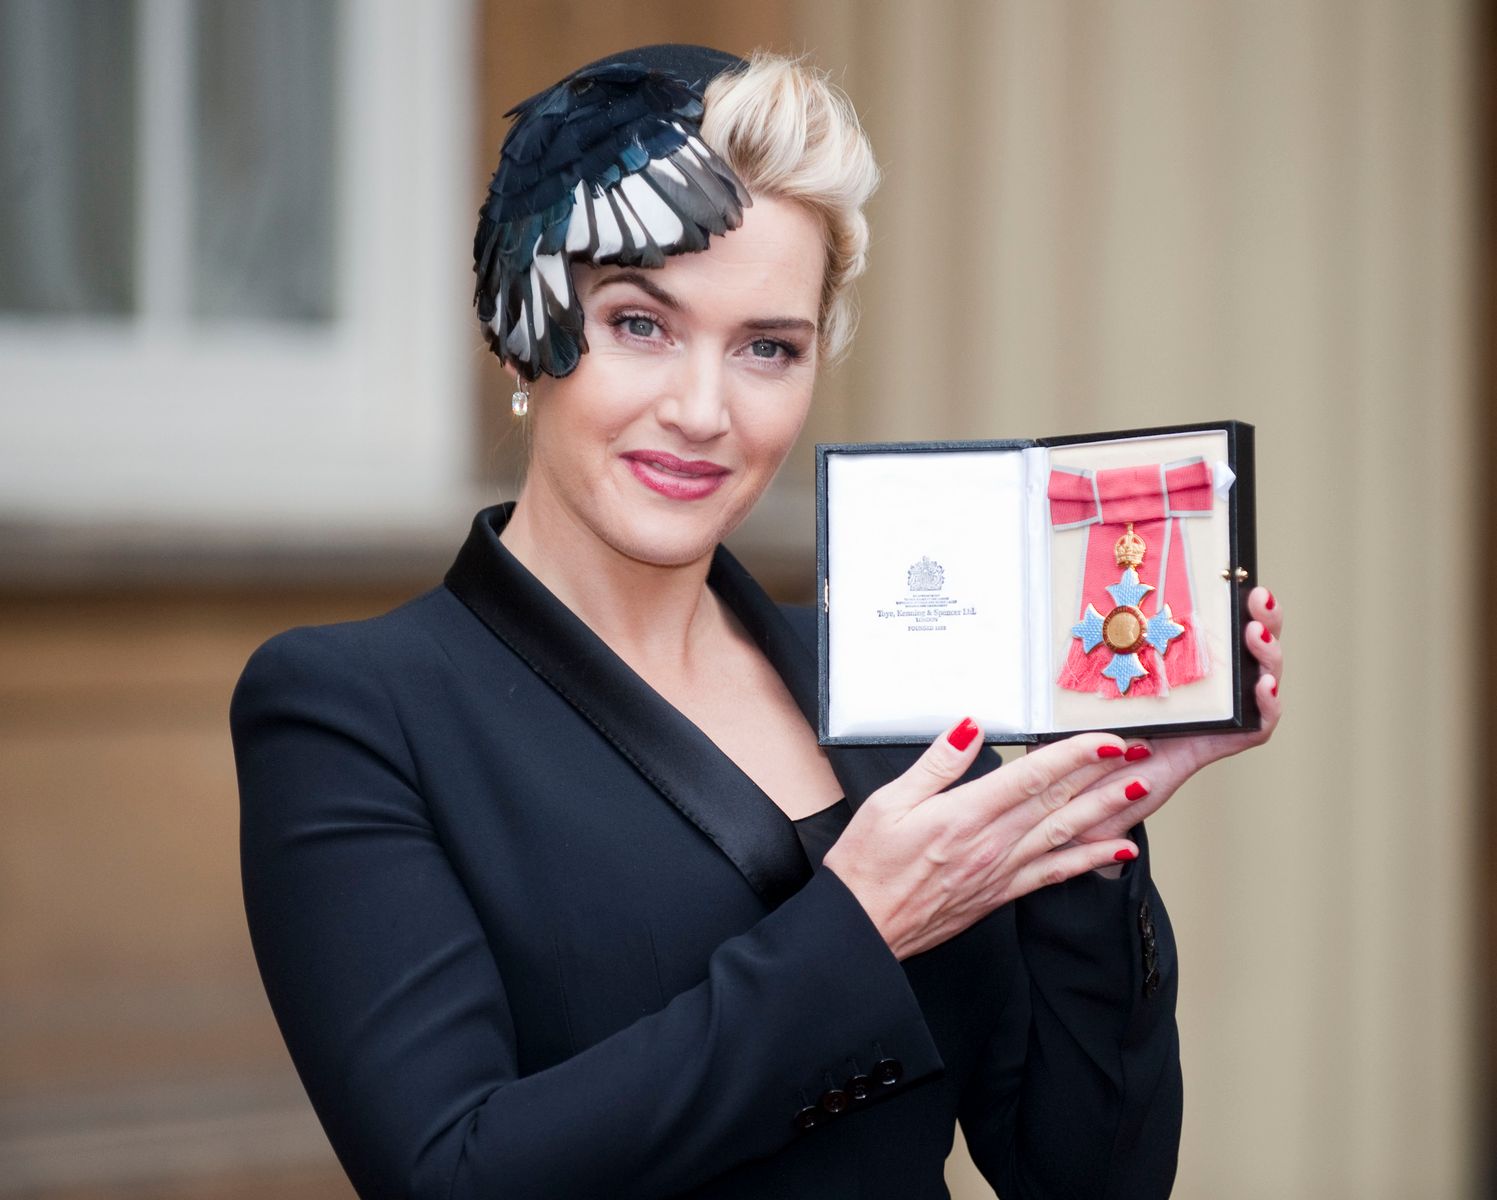 Actress Kate Winslet shows off her 2012 CBE award after an investiture ceremony with Queen Elizabeth II at the Buckingham Palace. | Photo: Getty Images